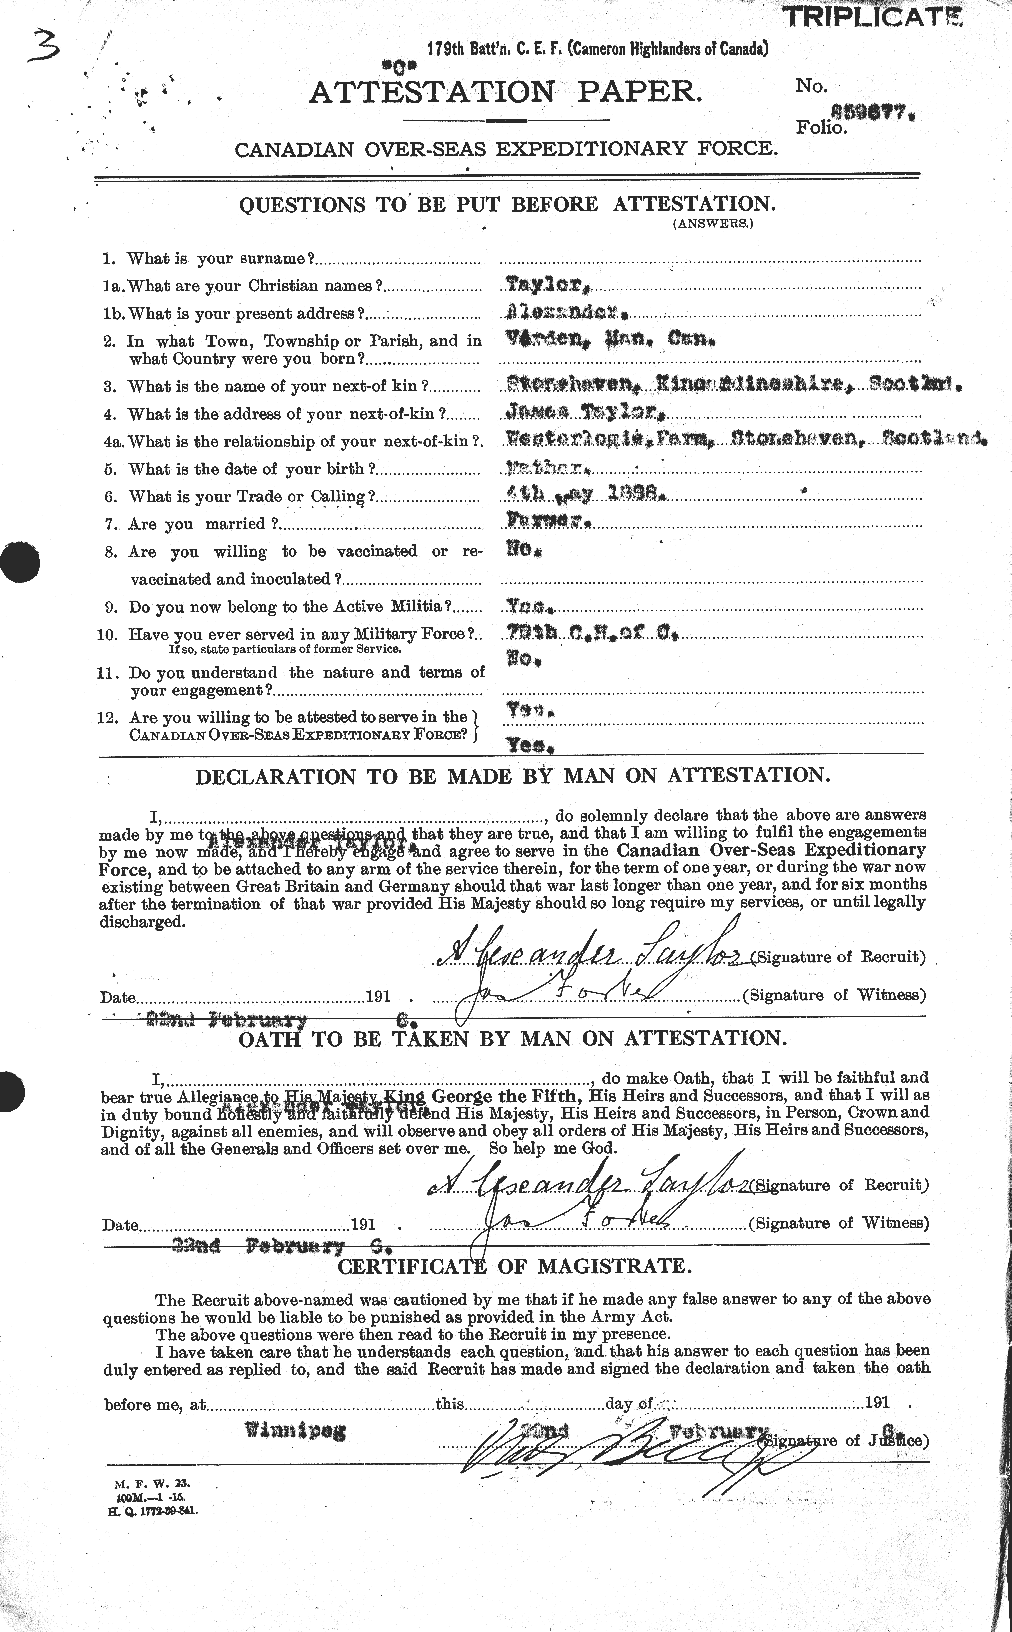 Personnel Records of the First World War - CEF 626139a